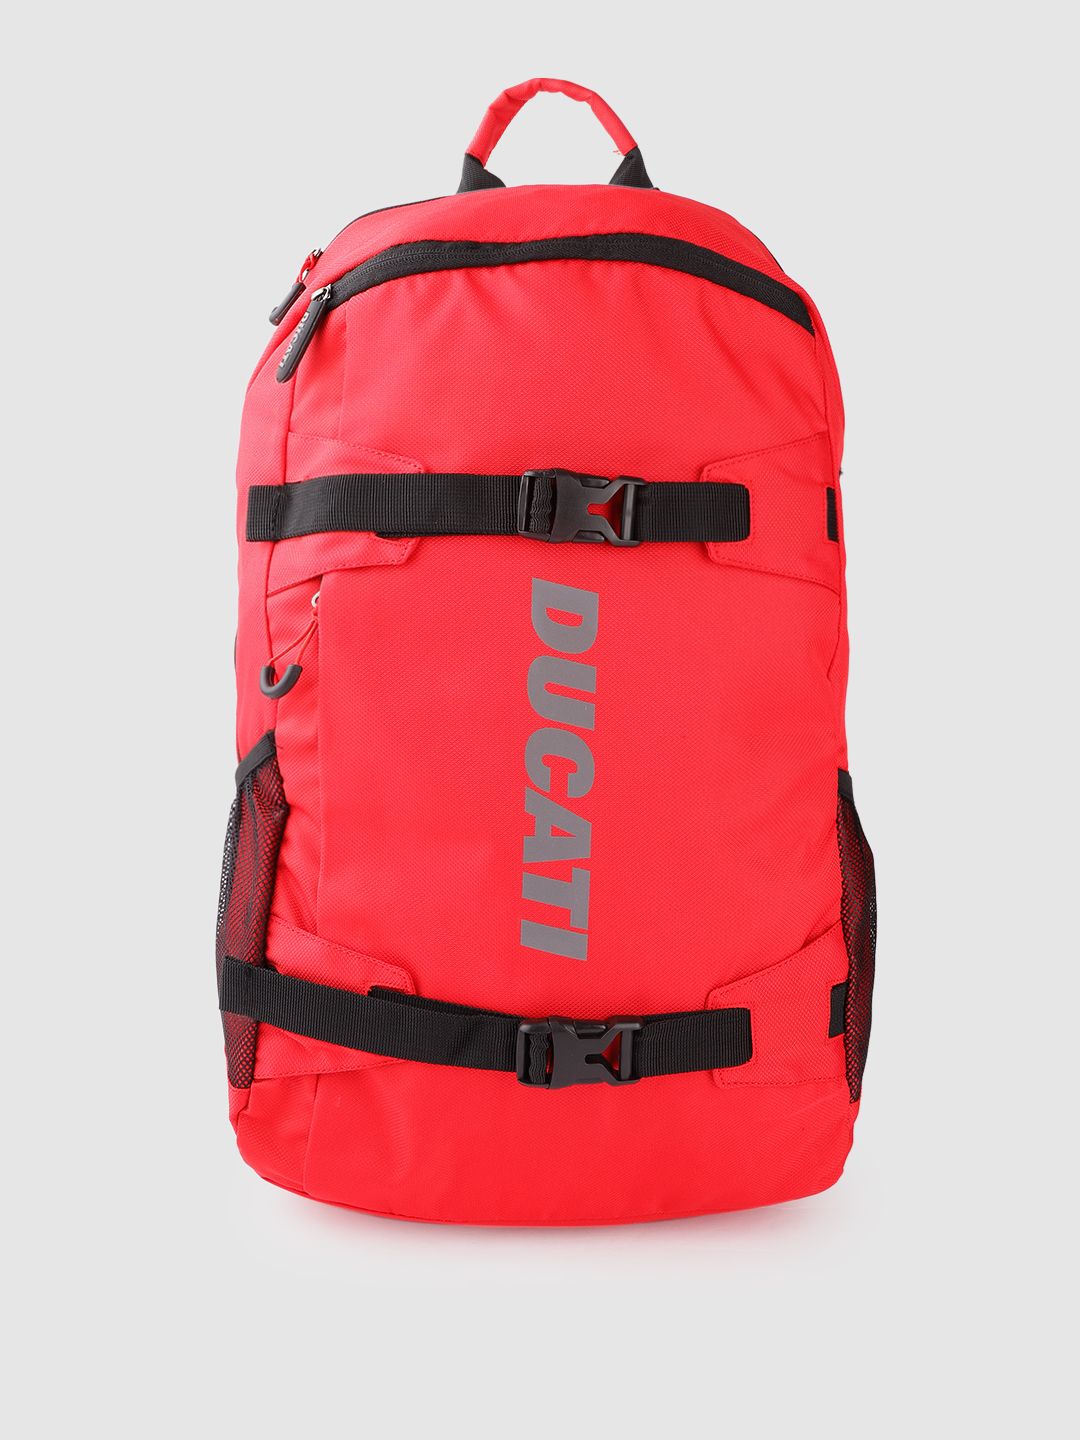 Ducati Unisex Red Brand Logo Print 16 Inch Laptop Backpack Price in India